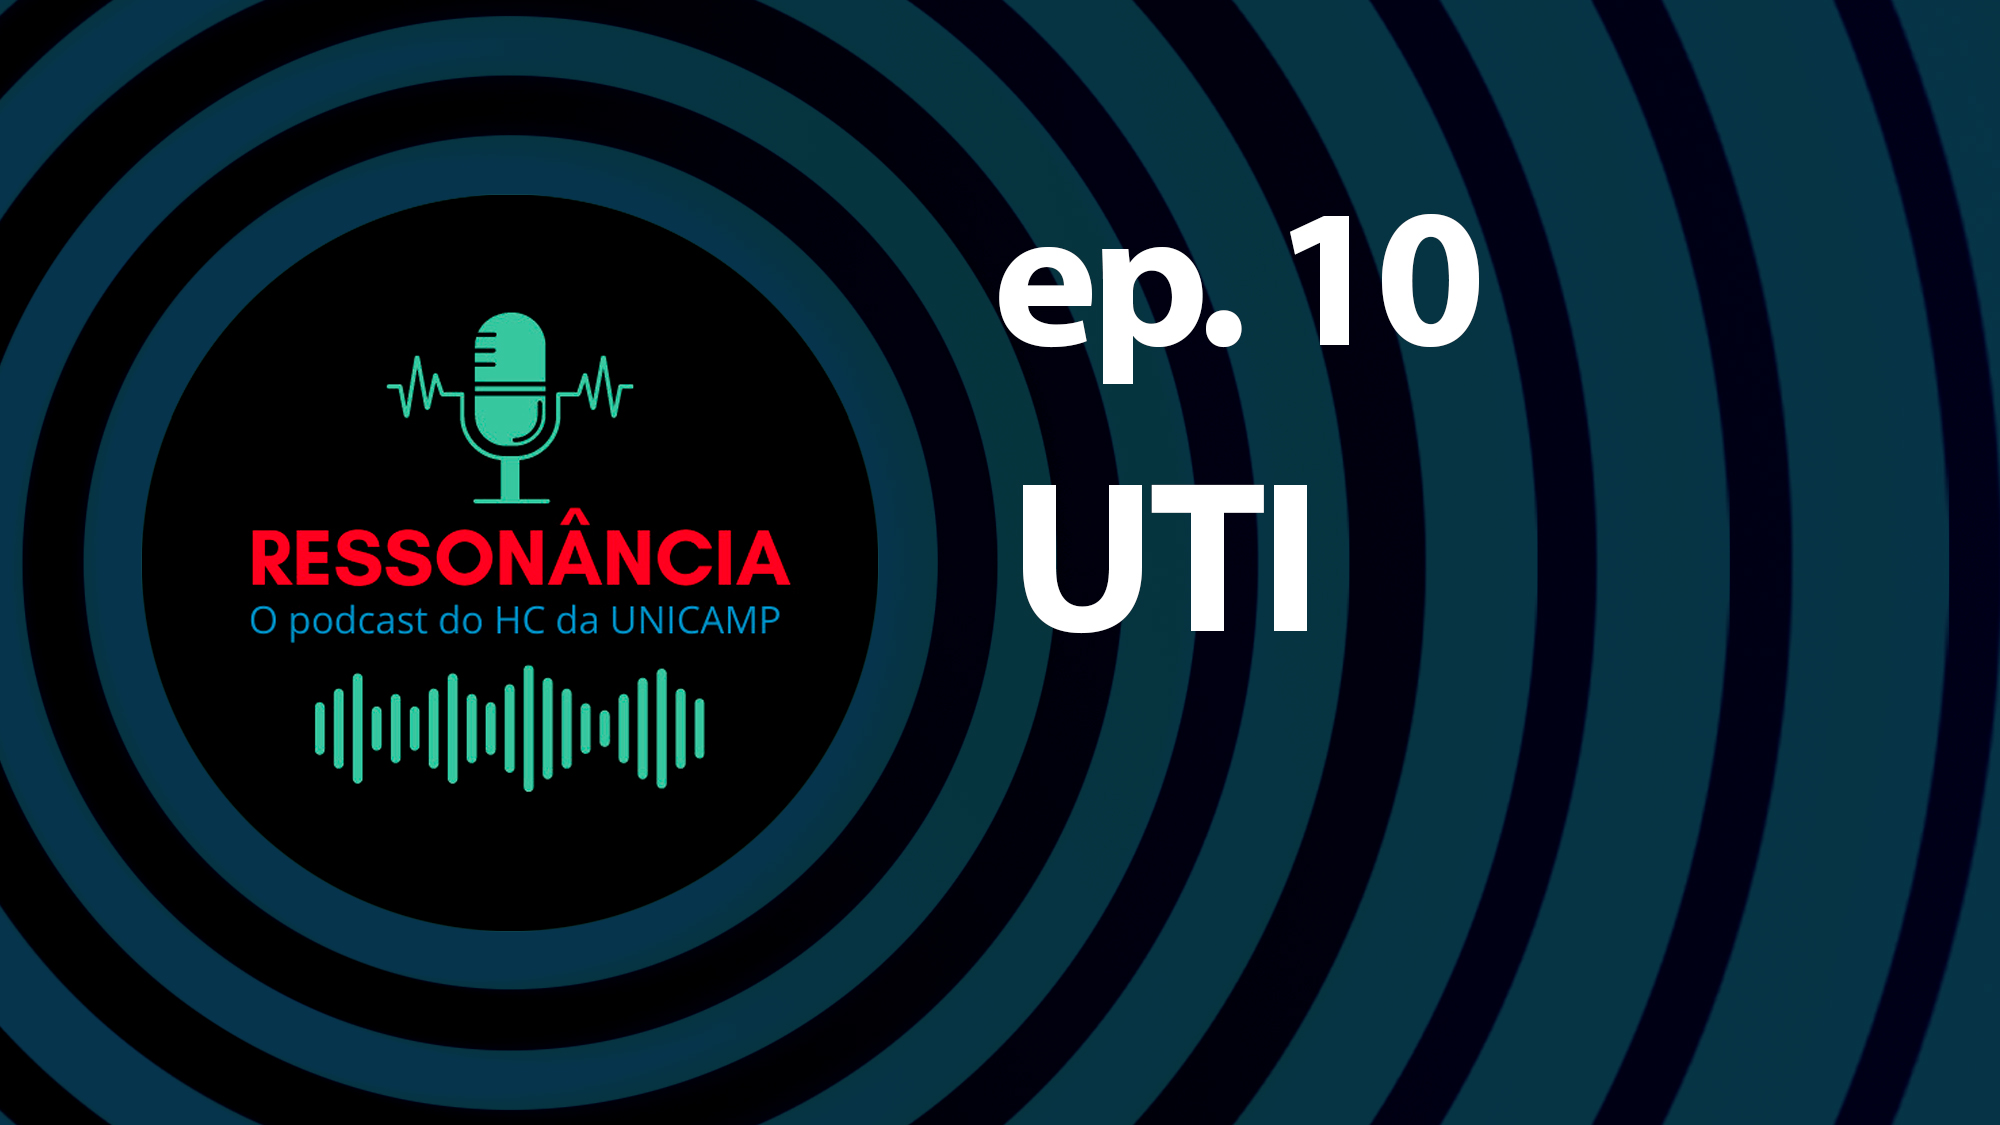 http://www.sec.unicamp.br/wp-content/uploads/2023/02/Thumbnail-Youtube-Potcast-Ressonncia-EP10-1.jpg